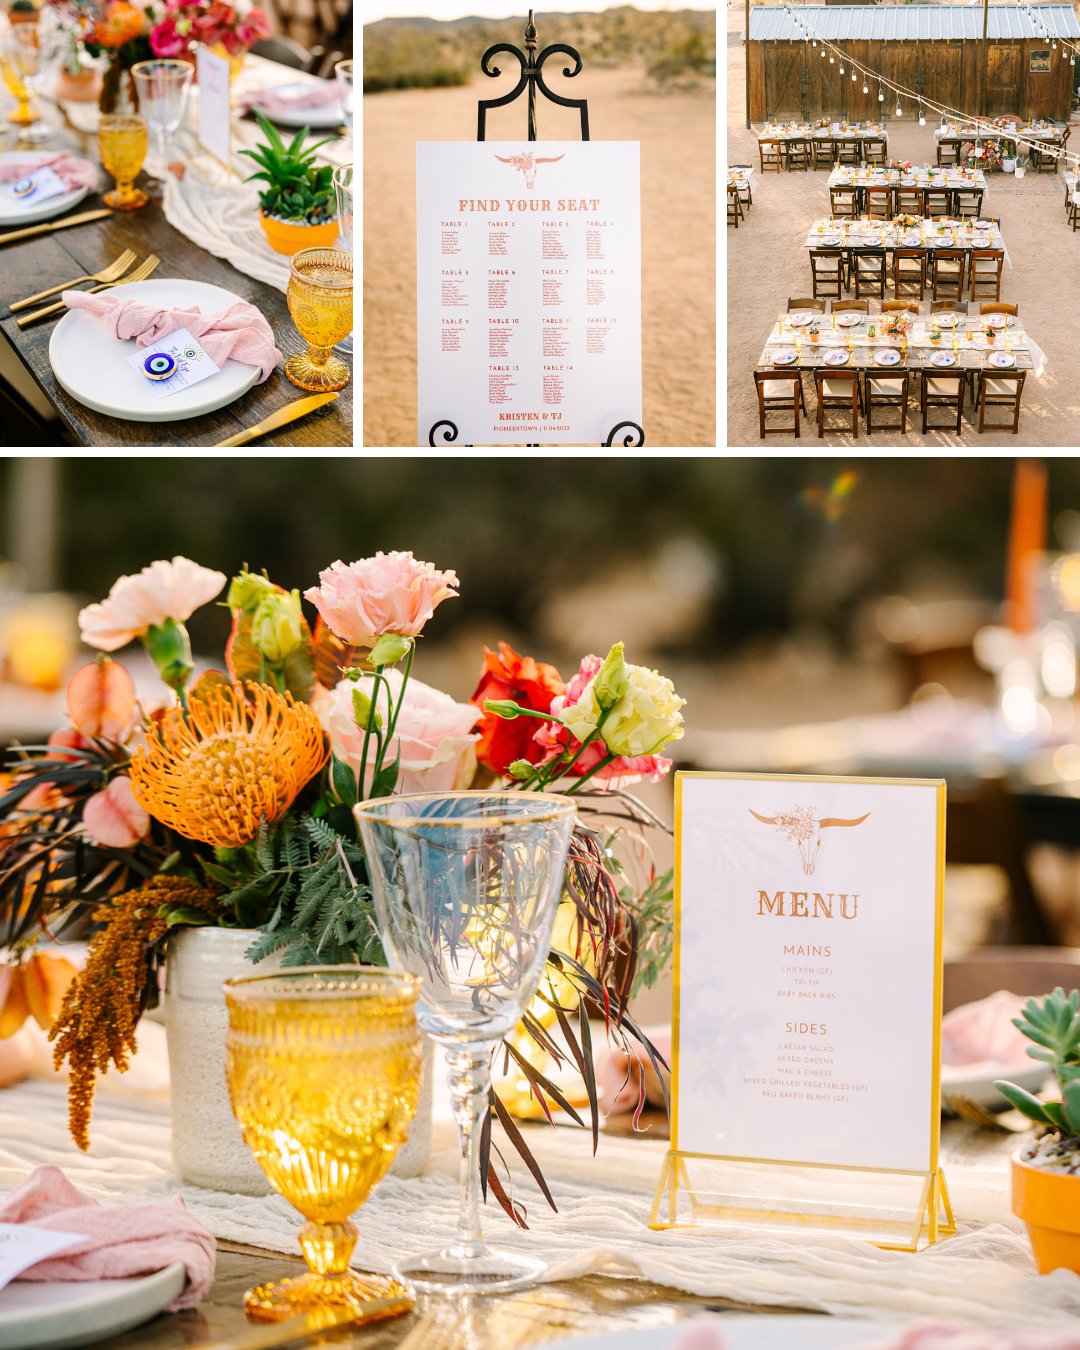 desert themed reception decor, table settings and "find your seat" sign